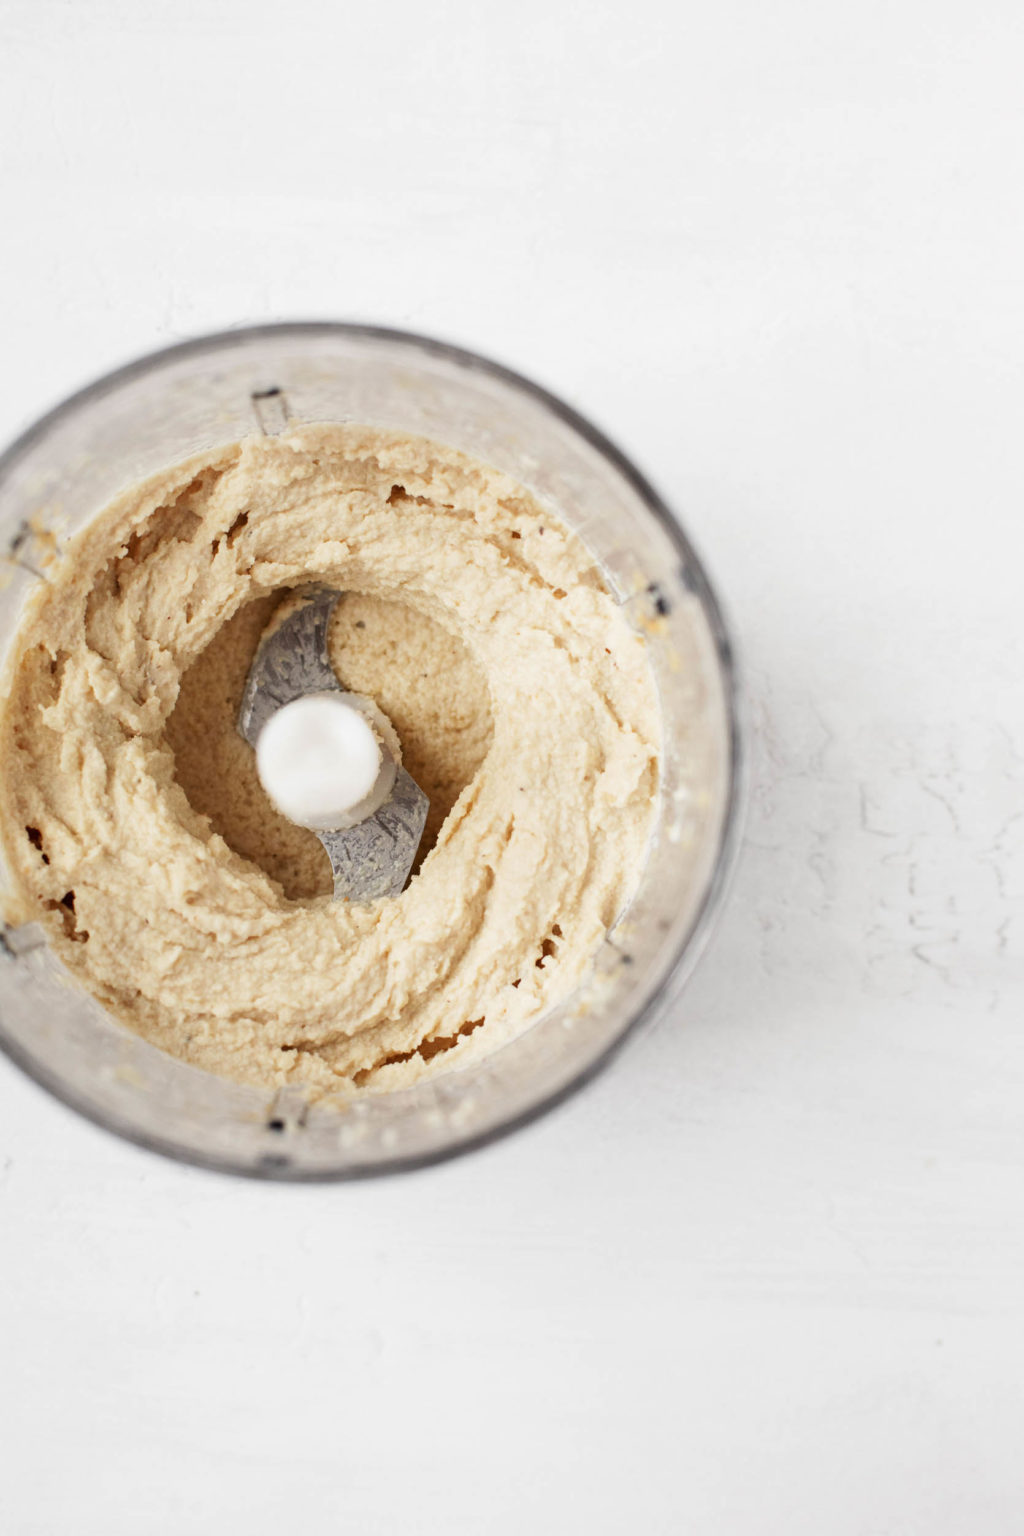 Cashews have been whipped into a creamy, spreadable mixture in a food processor.